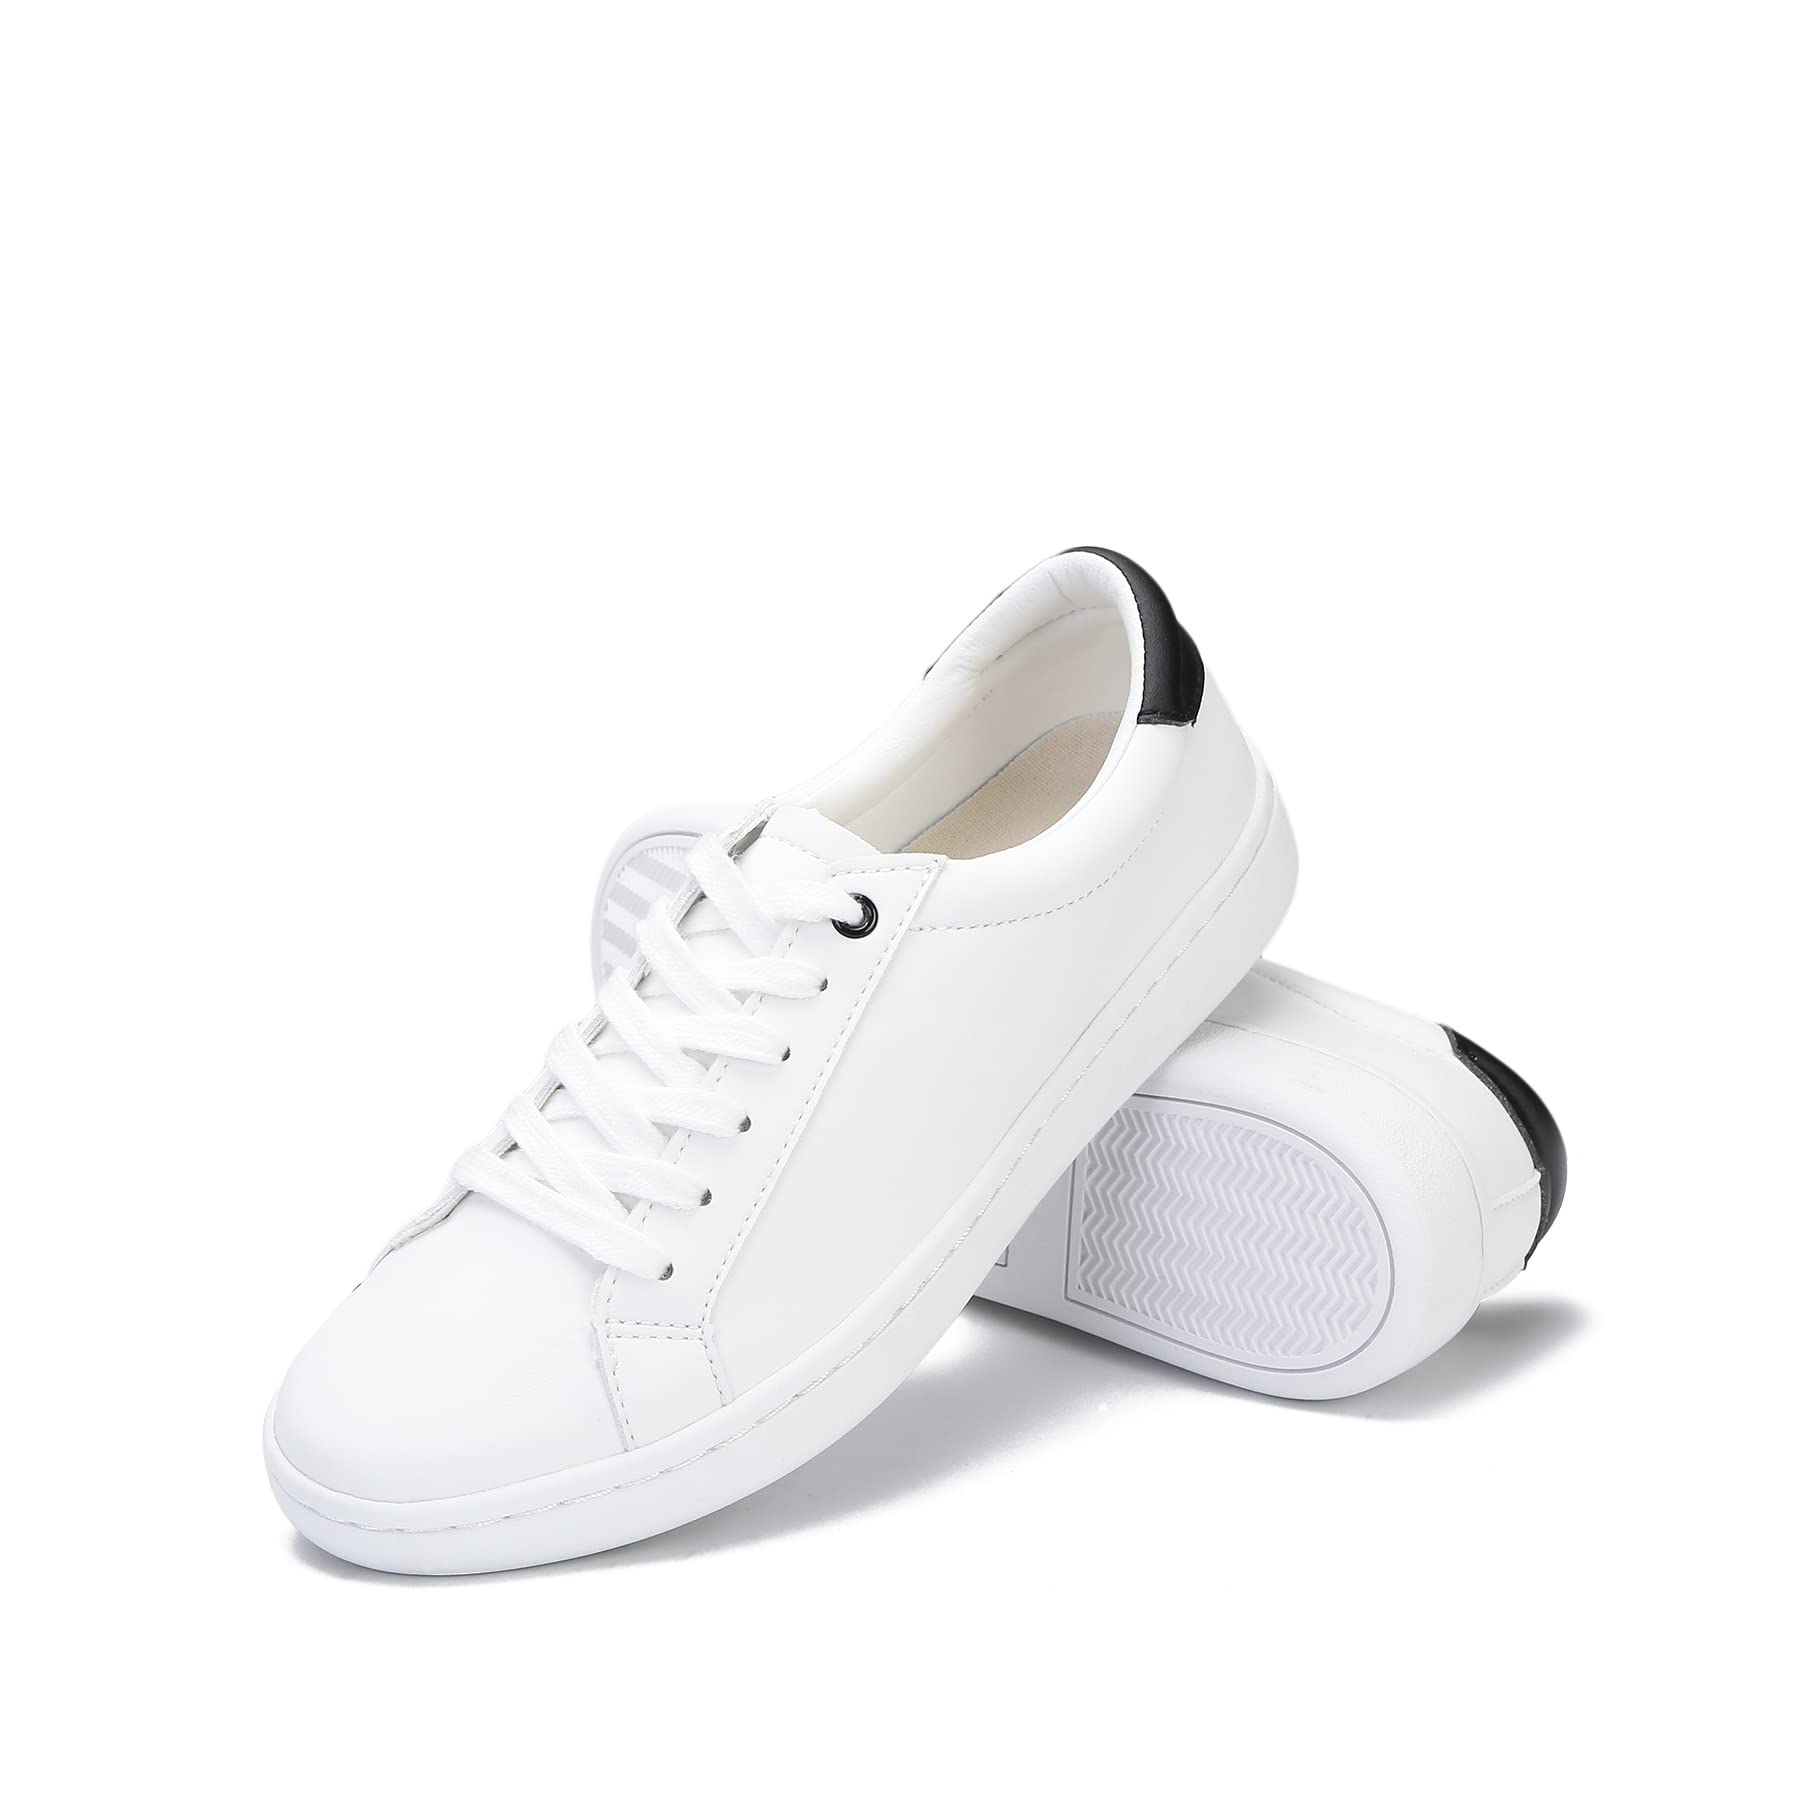 HONGHAIER Non Slip White Shoes for Women Microfiber Leather Fashion Sneakers Comfortable Womens Walking Shoes with Memory Foam WhiteBK 8